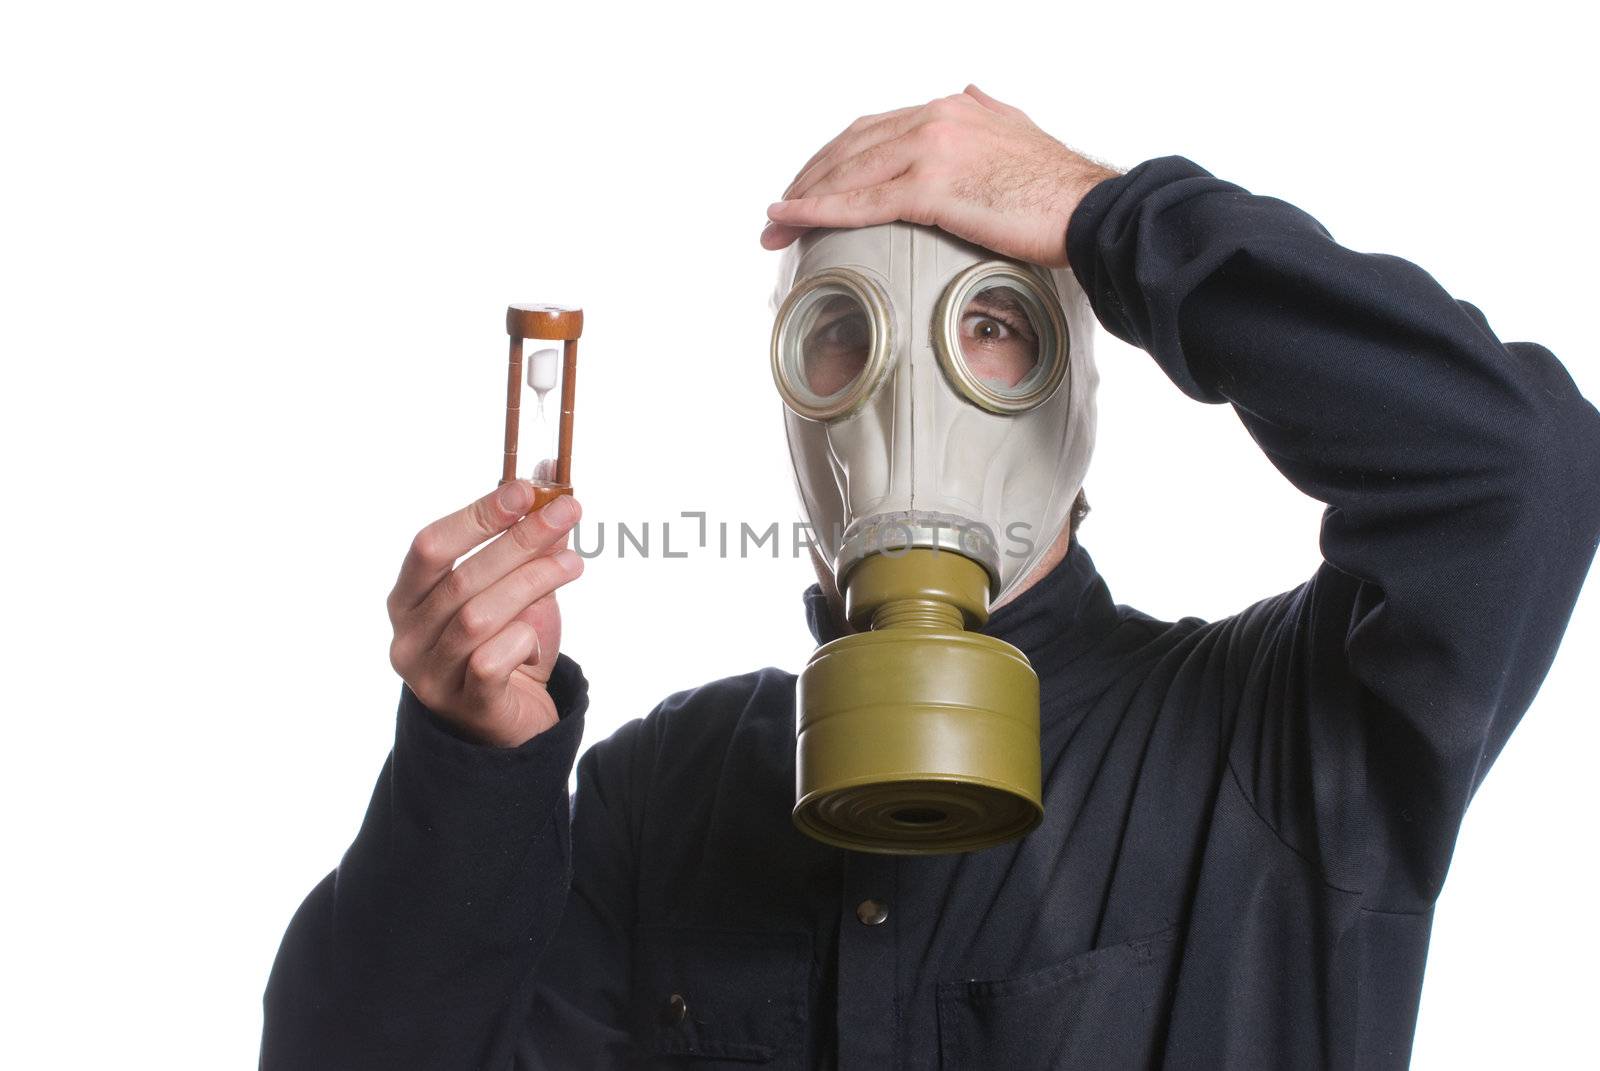 Concept image of the environment running out of time featuring a man wearing a gas mask holding an hour glass, isolated against a white background